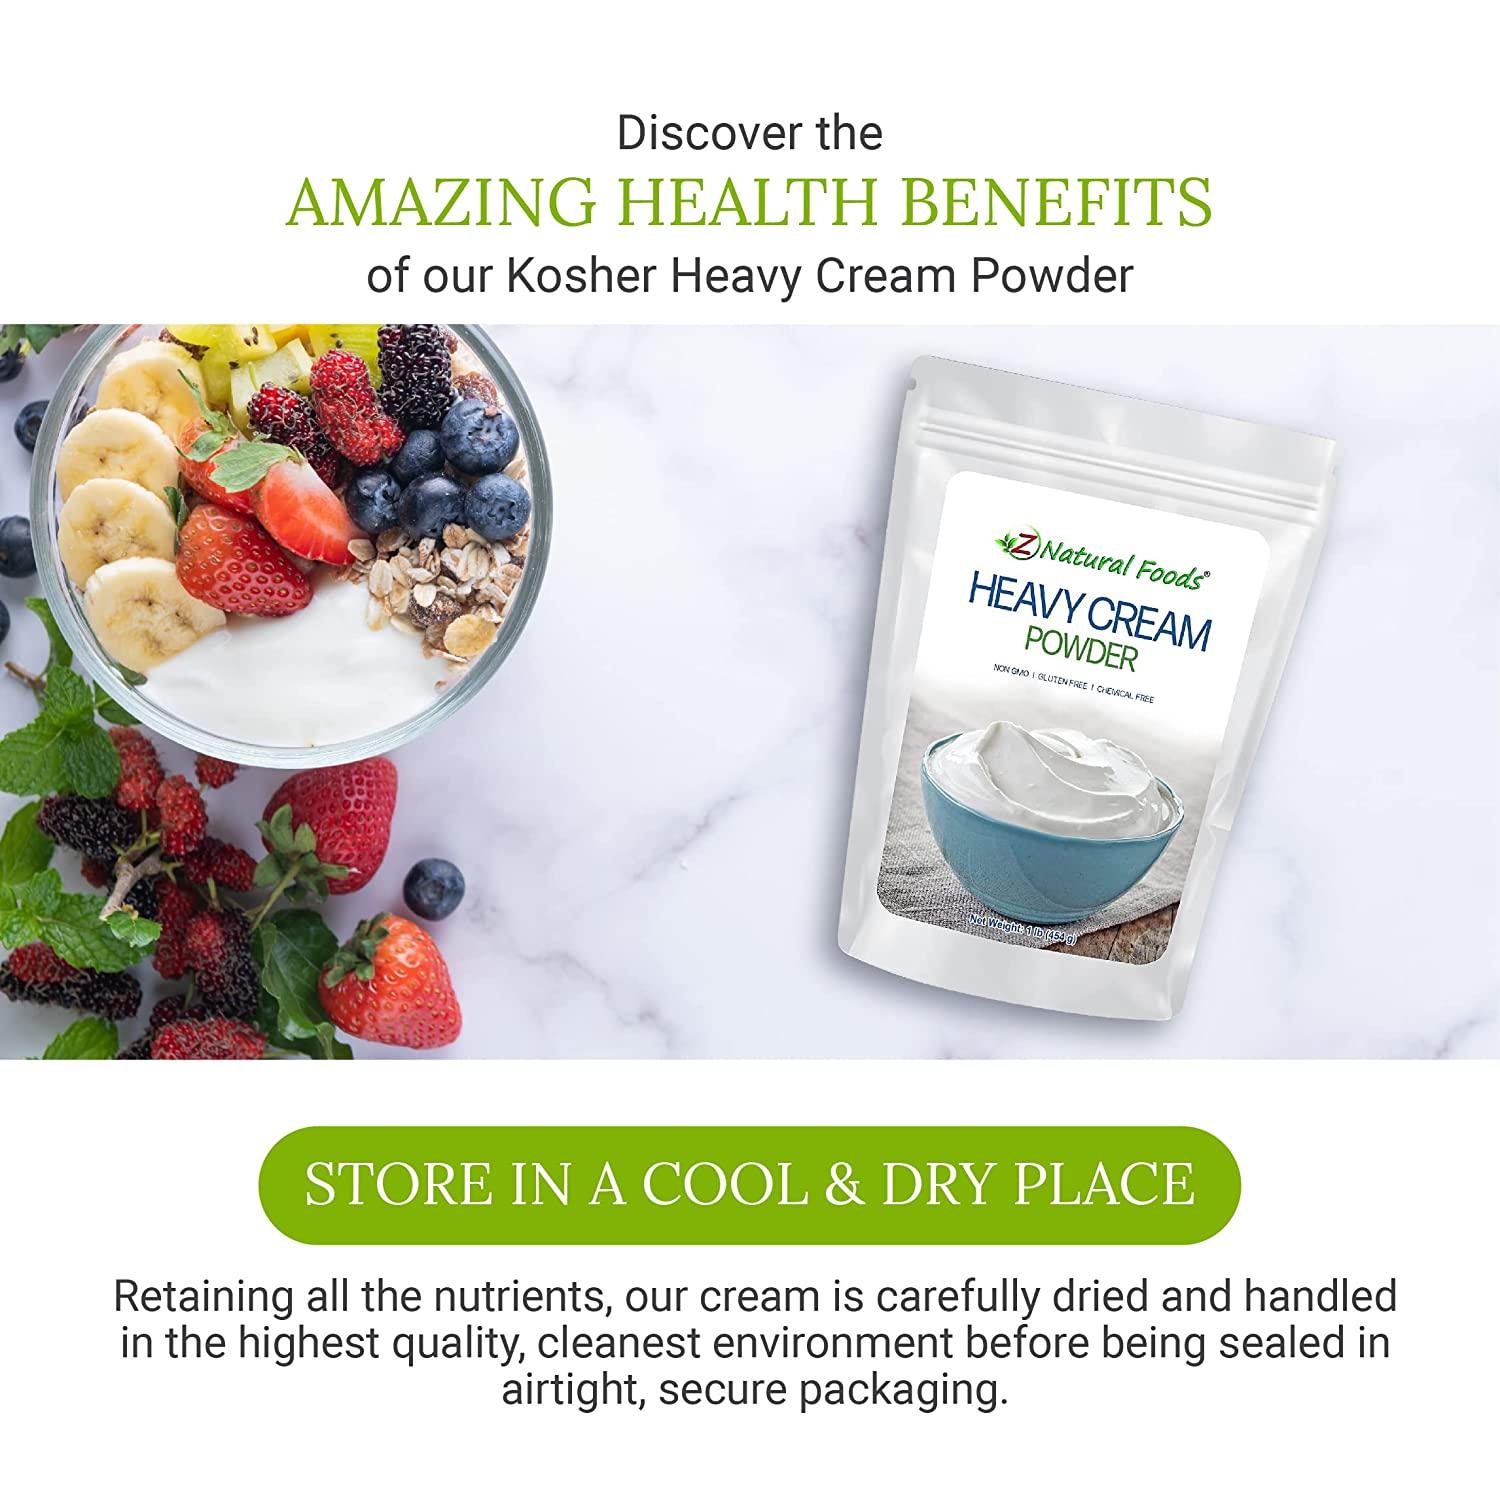 Heavy cream powder vs. heavy cream (The difference) – Z Natural Foods